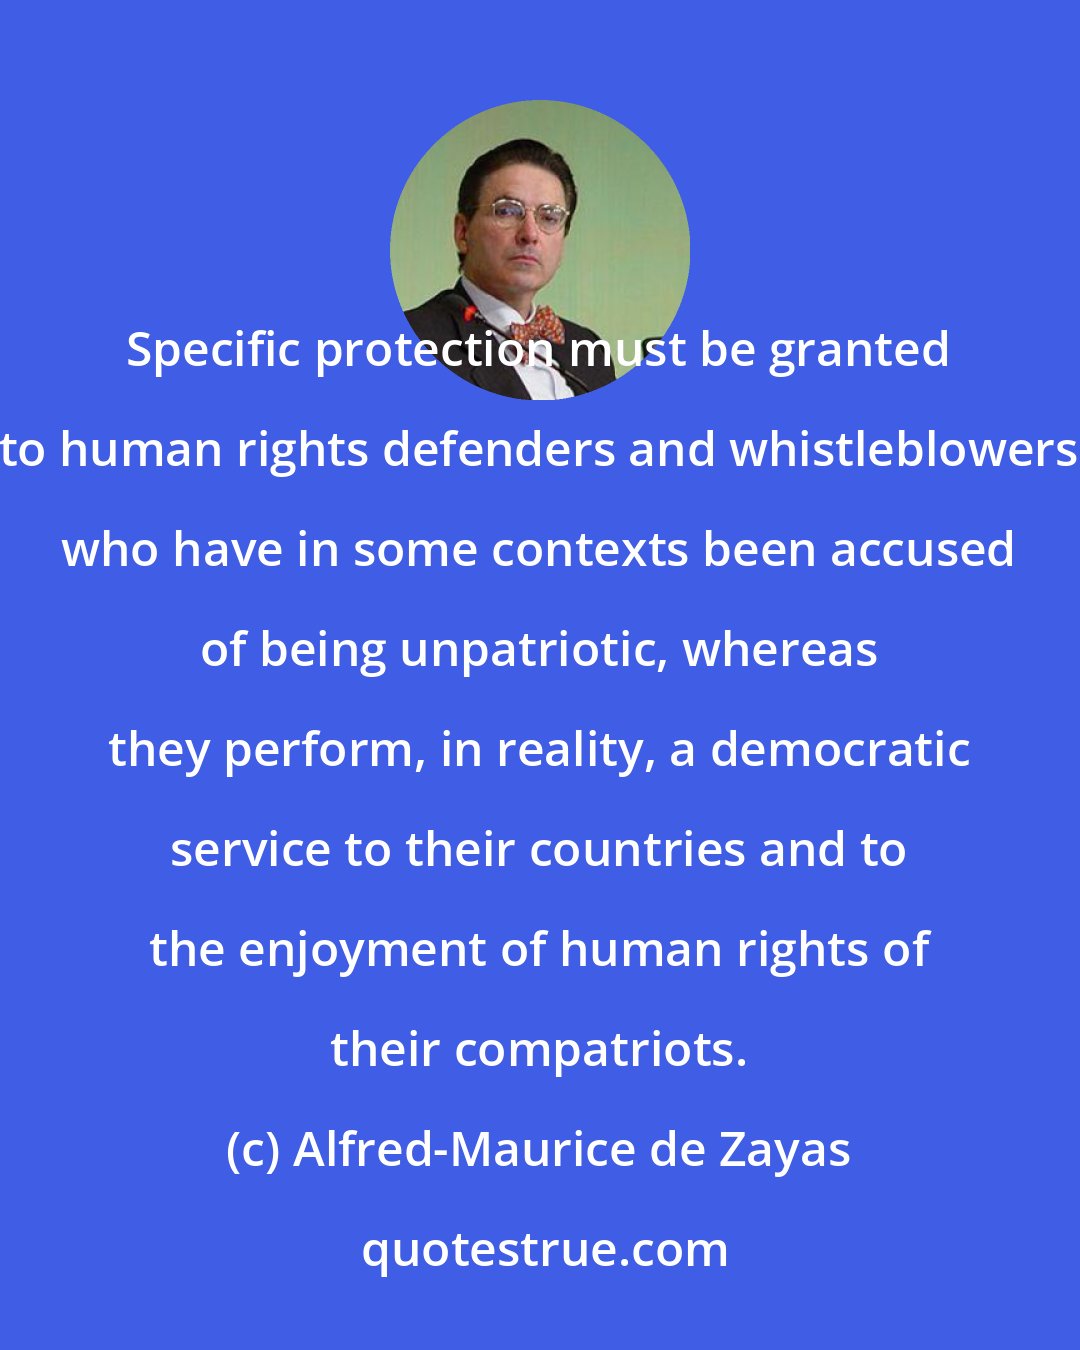 Alfred-Maurice de Zayas: Specific protection must be granted to human rights defenders and whistleblowers who have in some contexts been accused of being unpatriotic, whereas they perform, in reality, a democratic service to their countries and to the enjoyment of human rights of their compatriots.